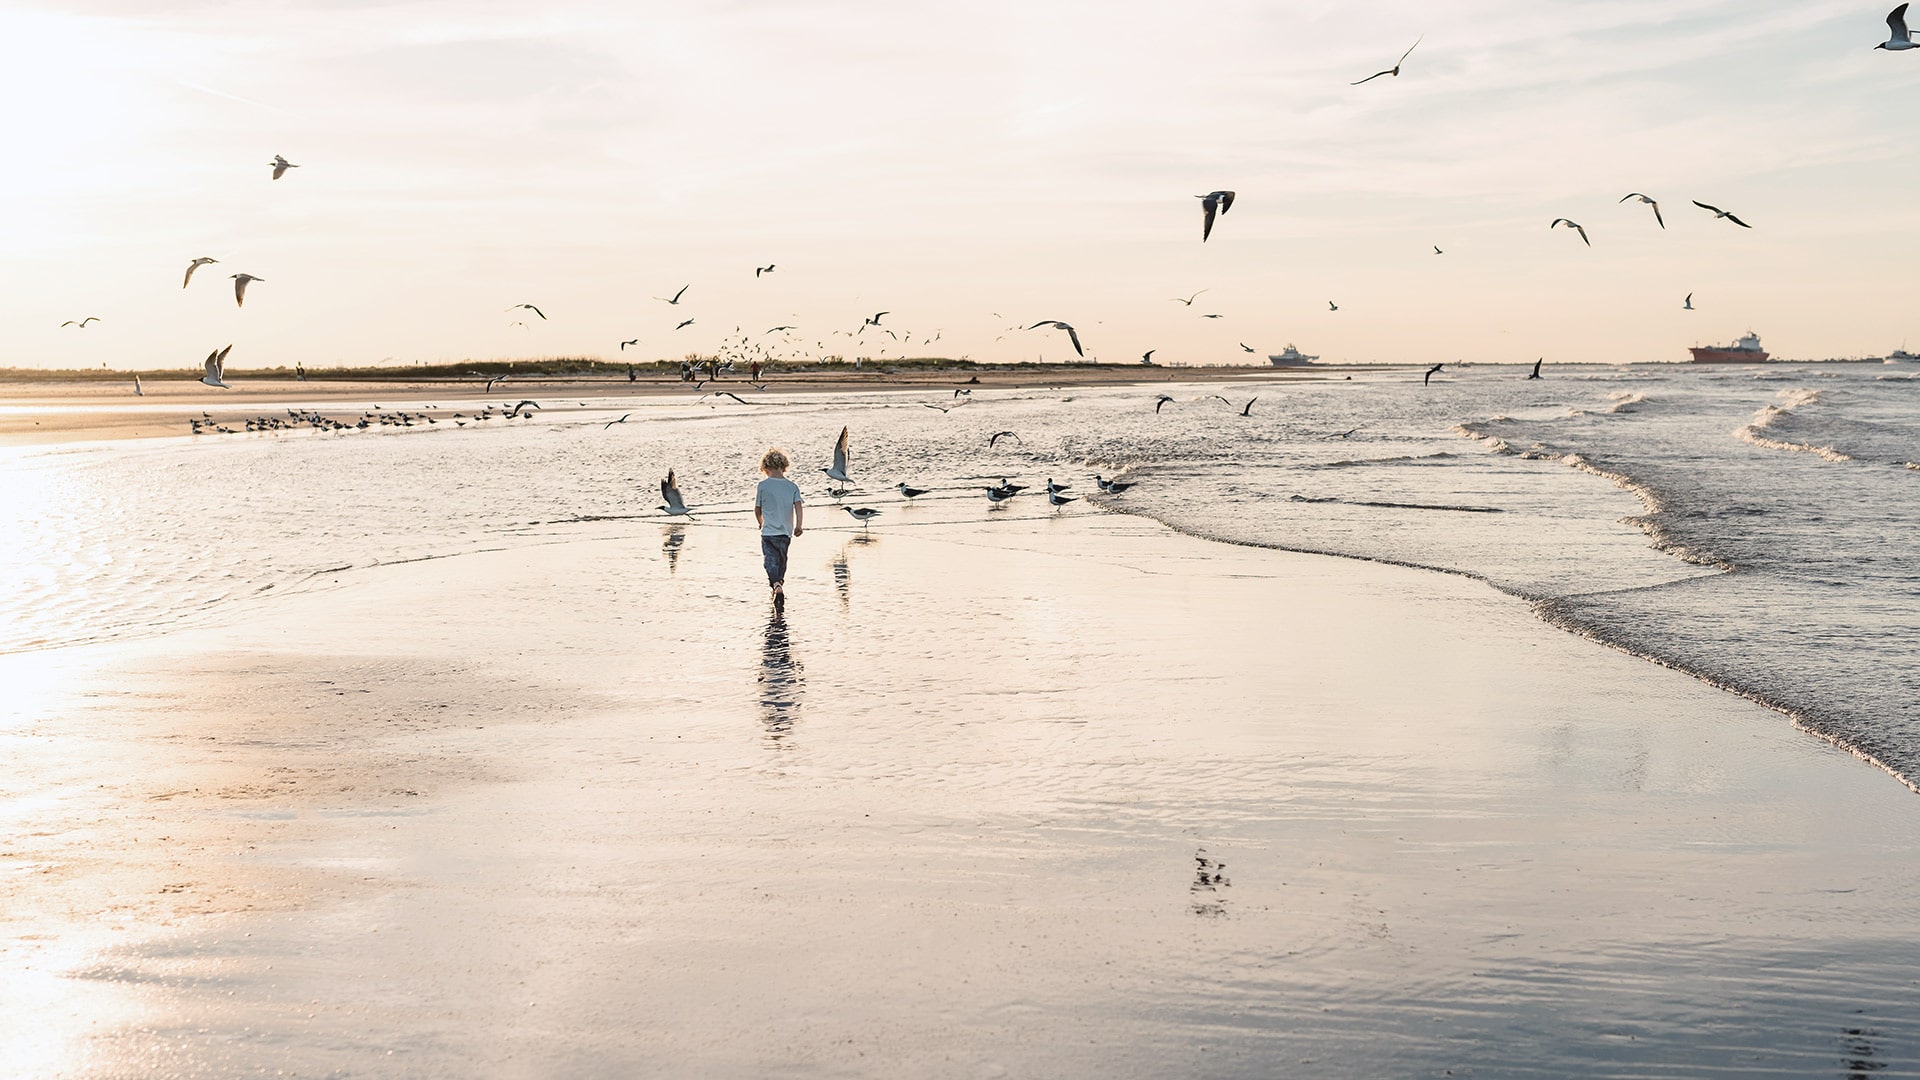 Child at beach with birds at sunset